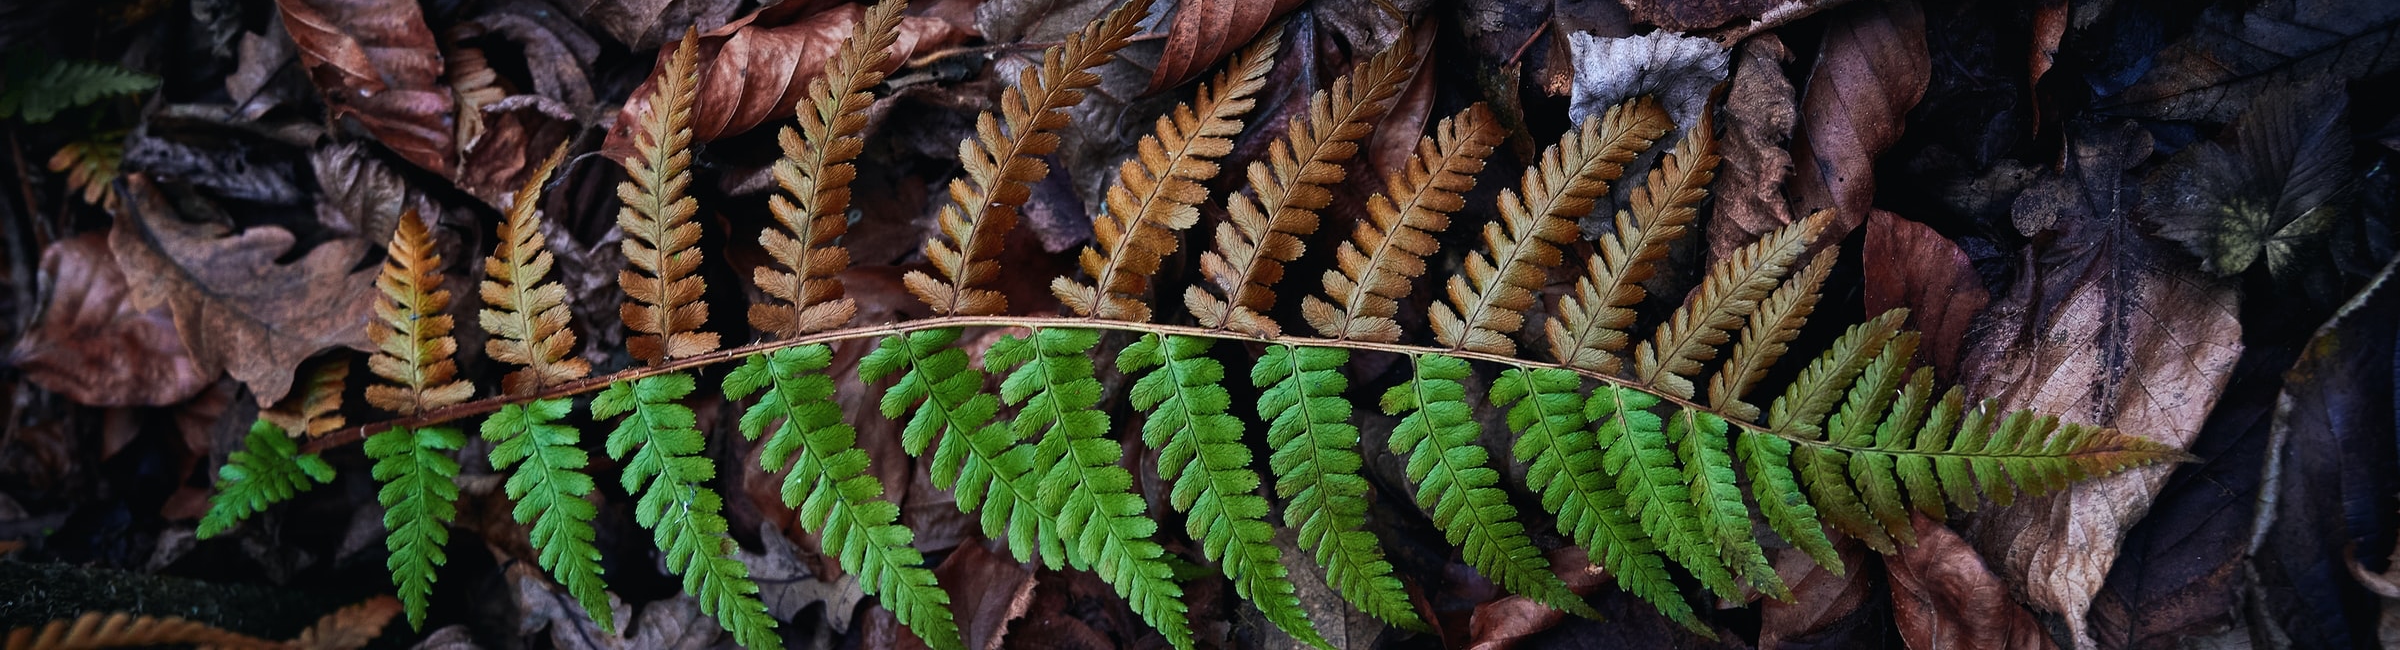 Fern leaf, dead and alive